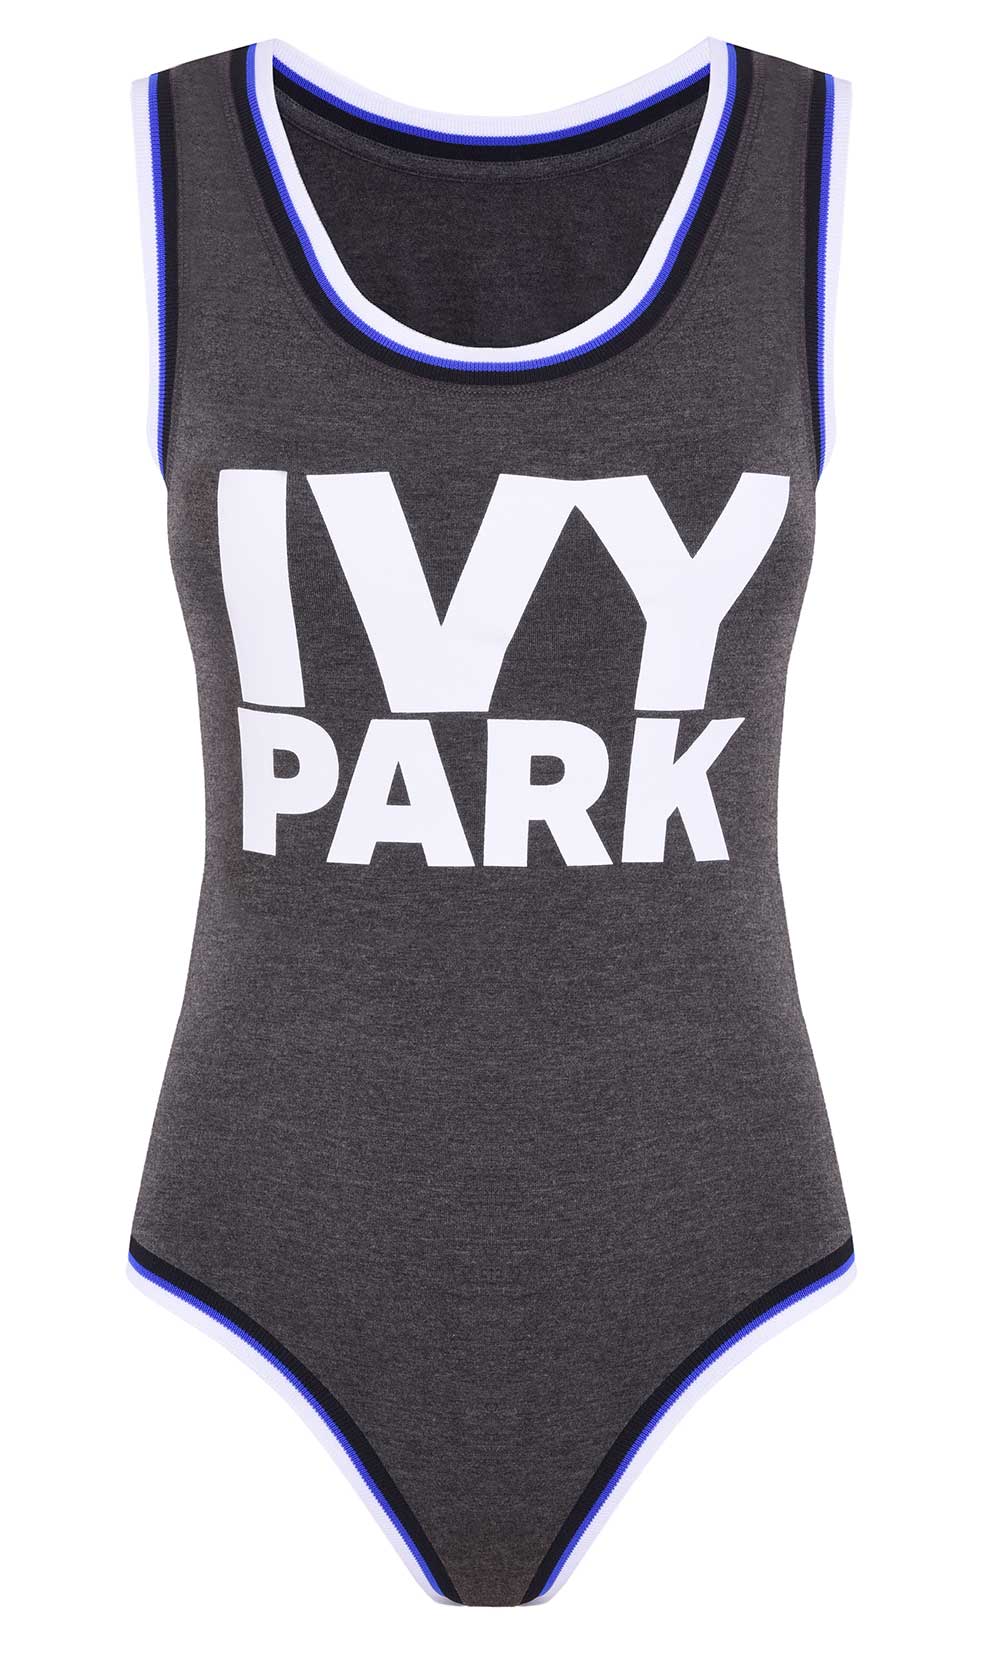 Sleeveless Logo Body by Ivy Park, $80 from Topshop